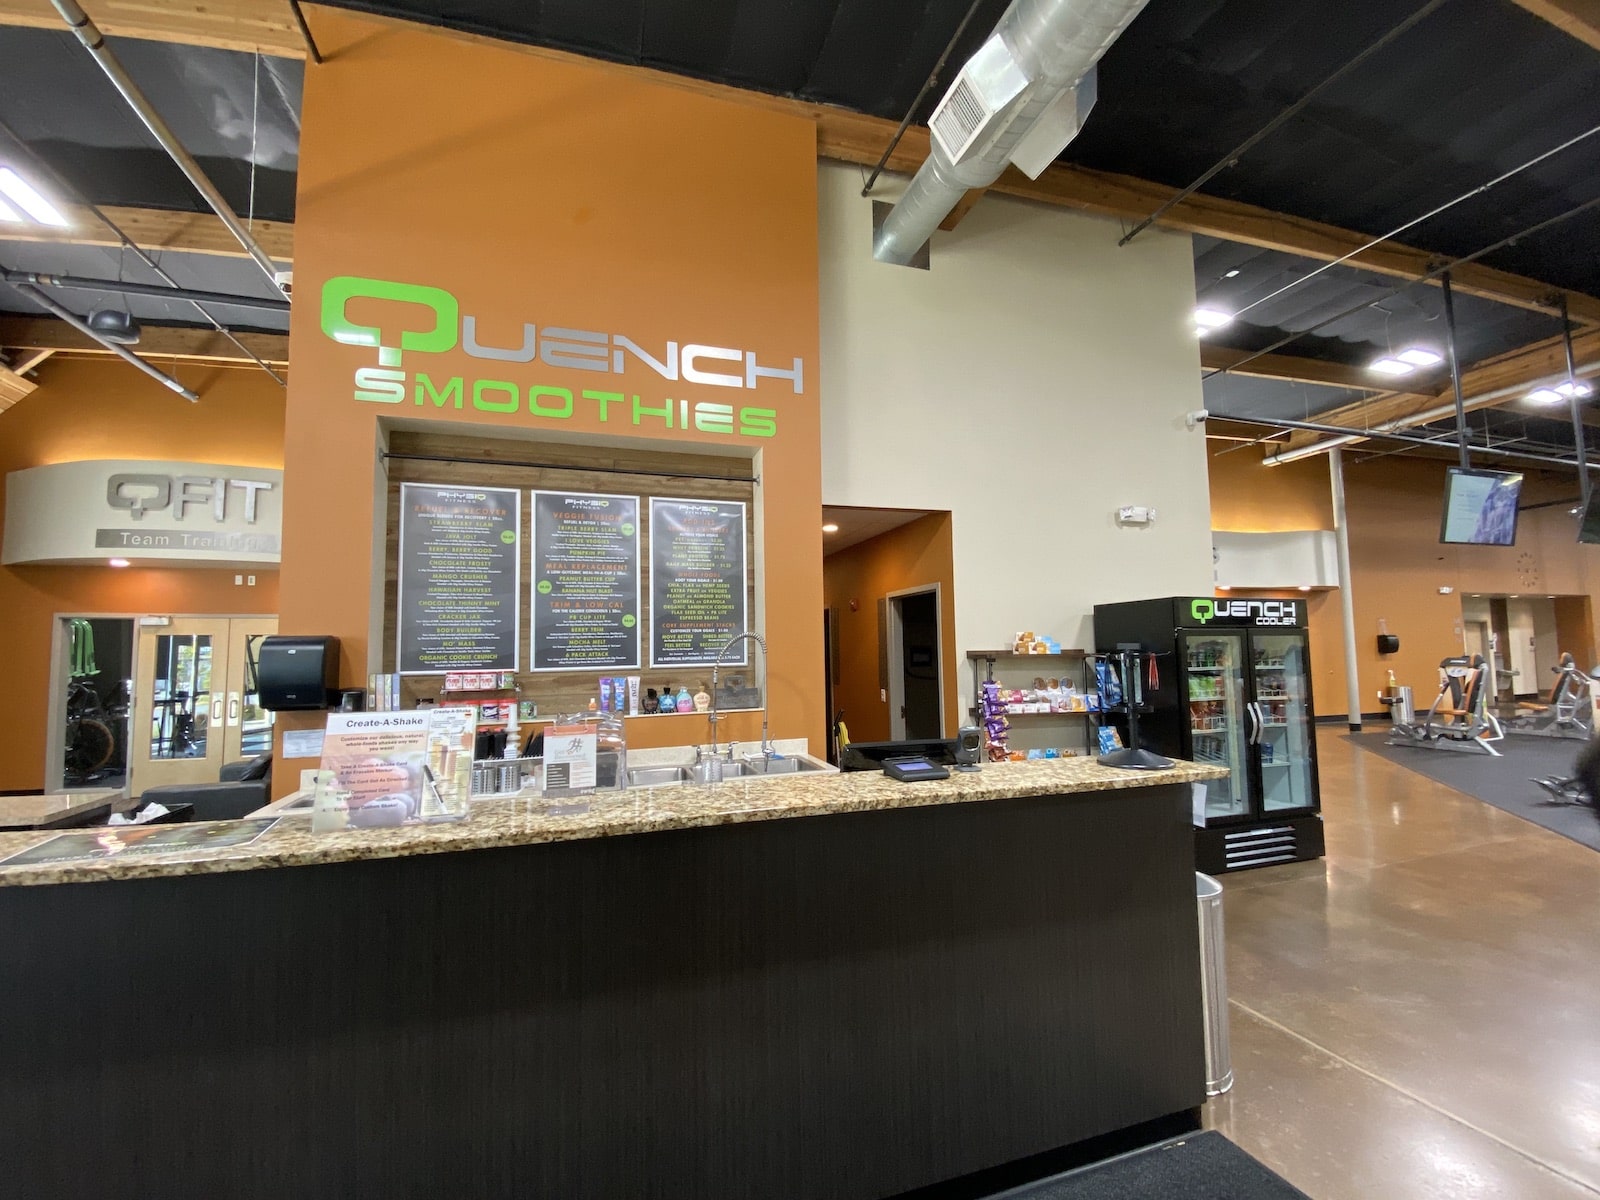 Smoothie Bar at Physiq Fitness Gym in South Salem